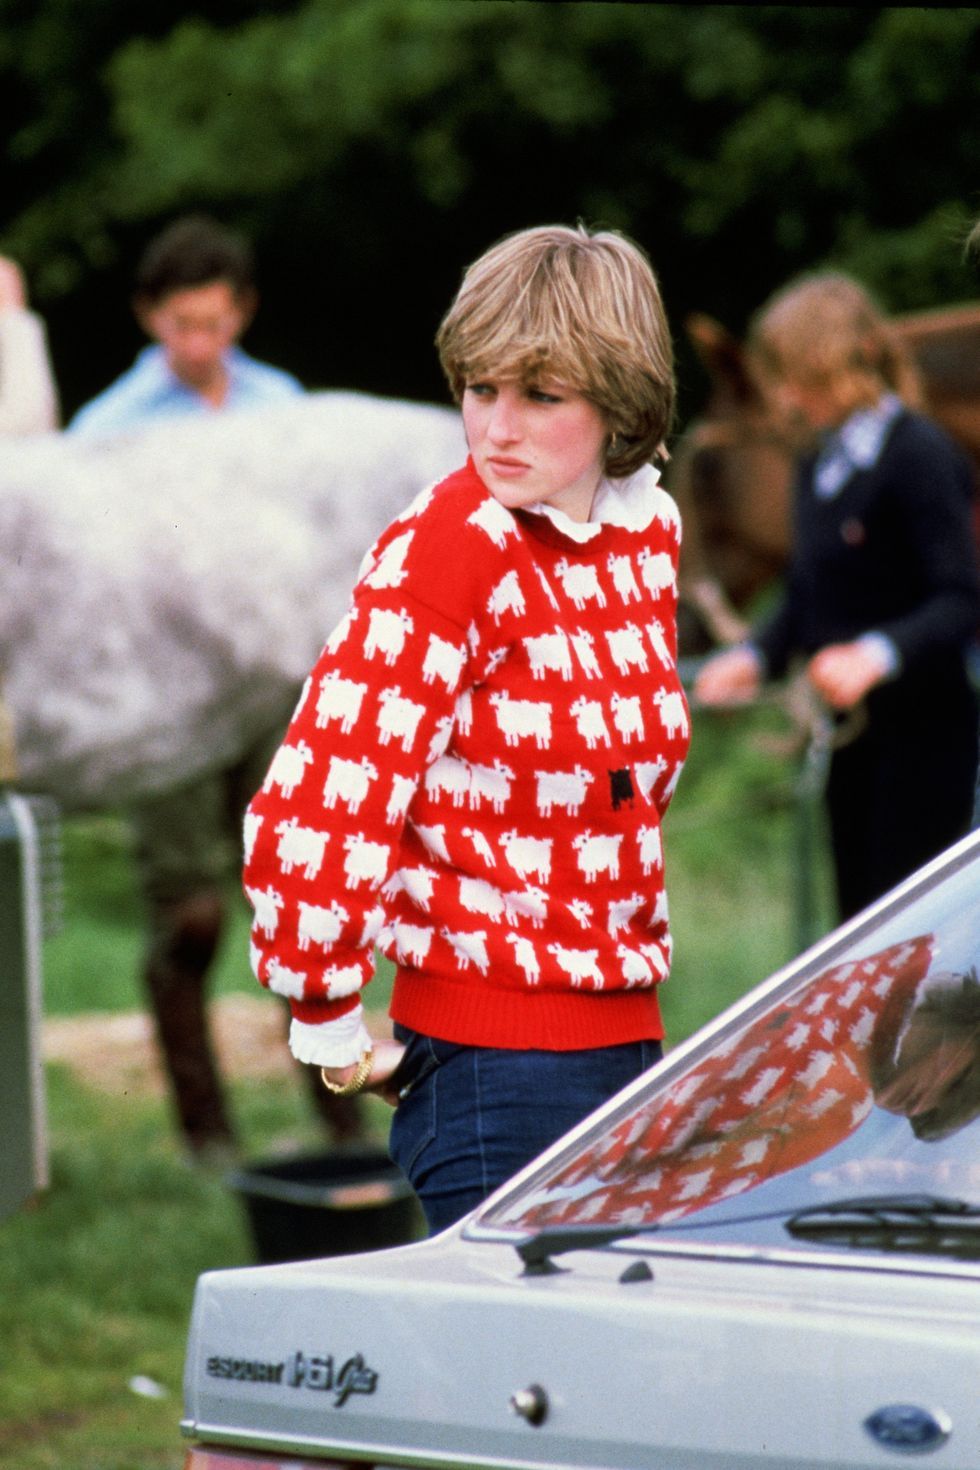 Princess Diana at the Windsor Polo match in 1980 wore a warm red sweater with a goat pattern.  She looks so stunning!  (photo: oprahdaily.com)